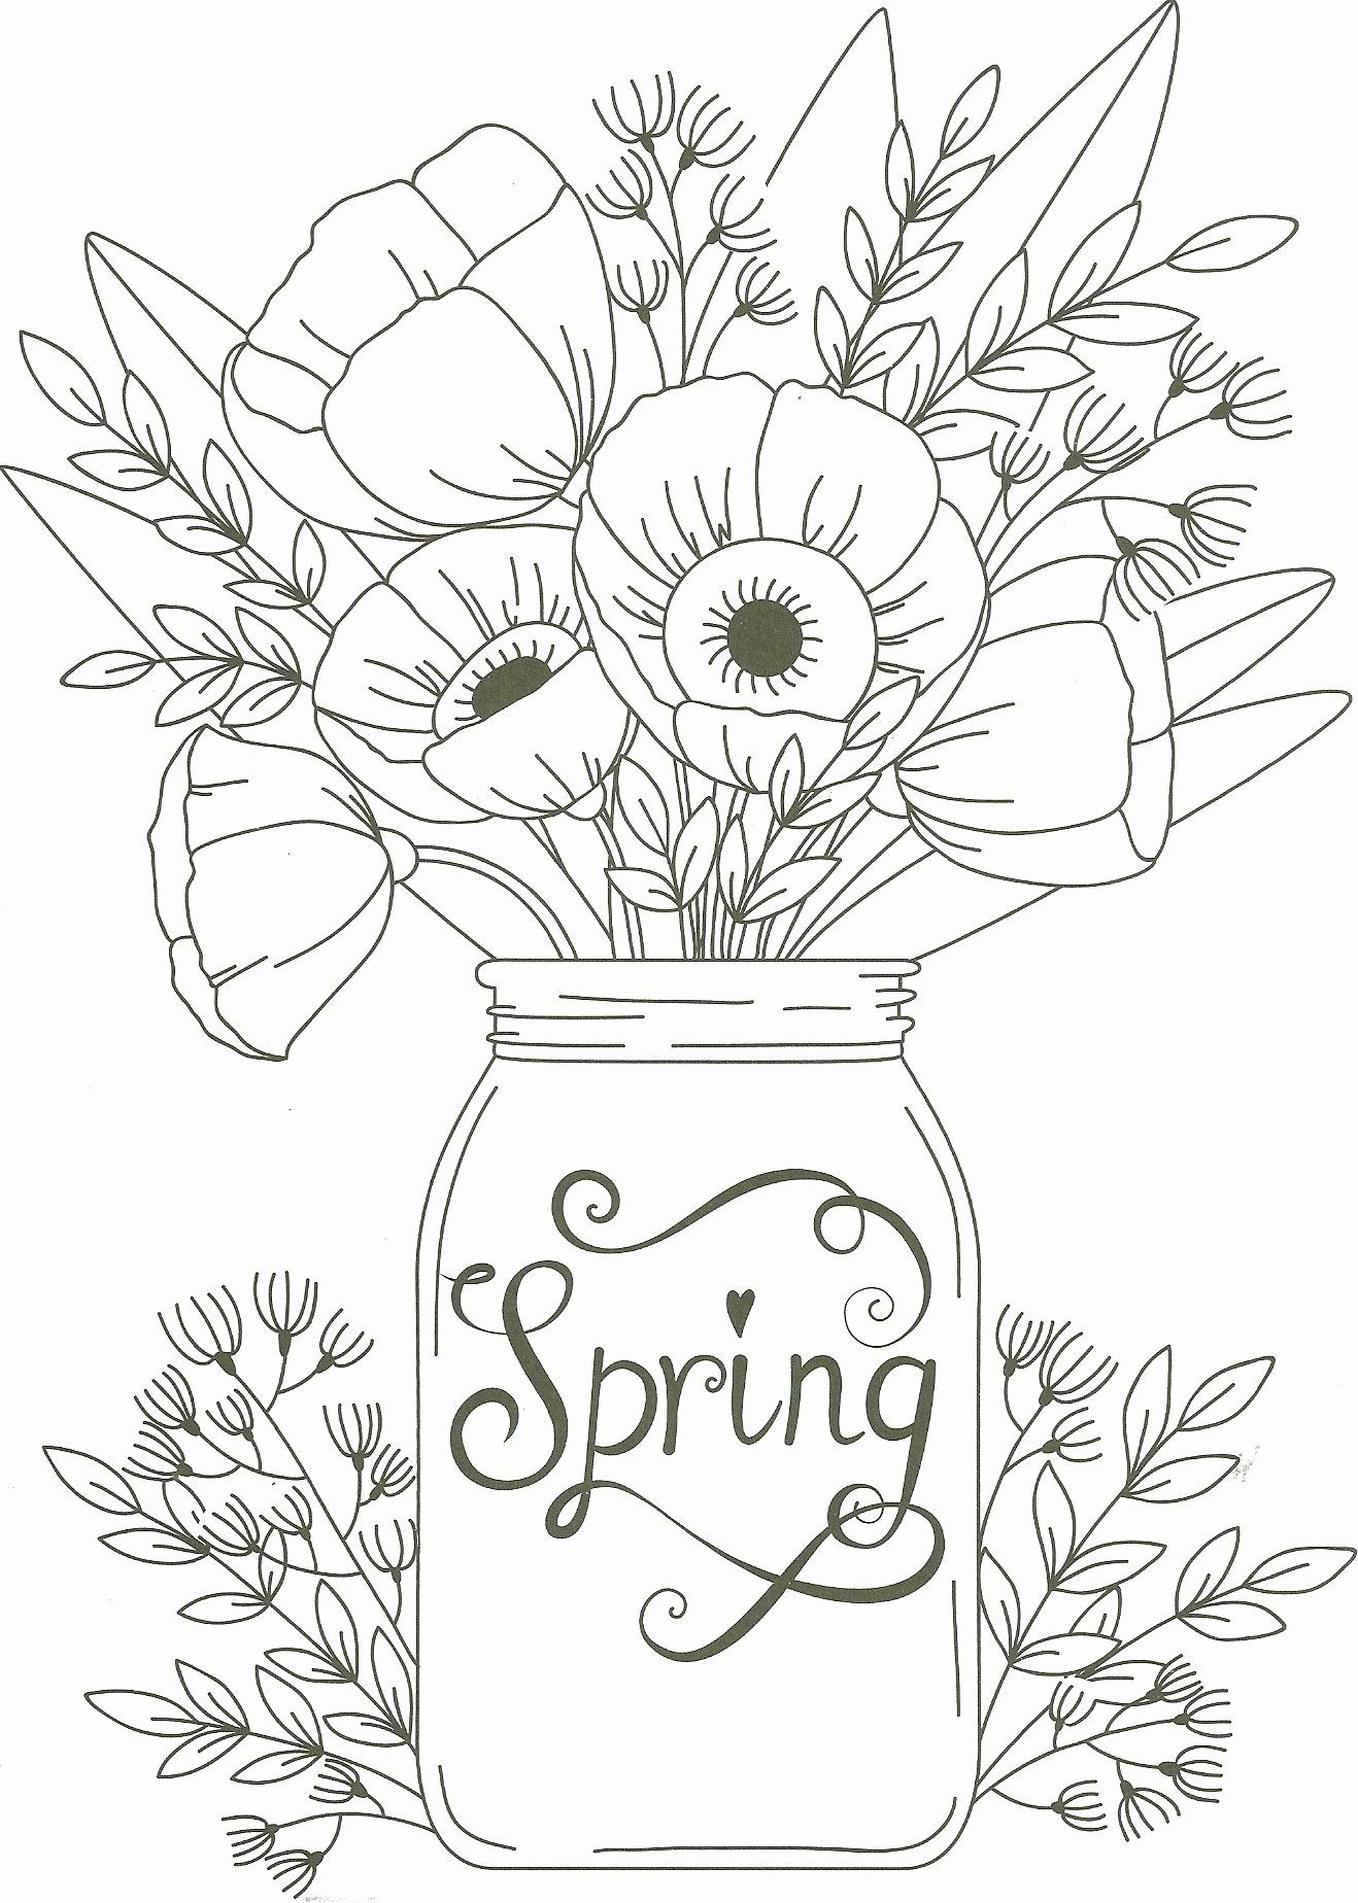 Free Printable Spring Coloring Pages For Adults FREE PRINTABLE TEMPLATES